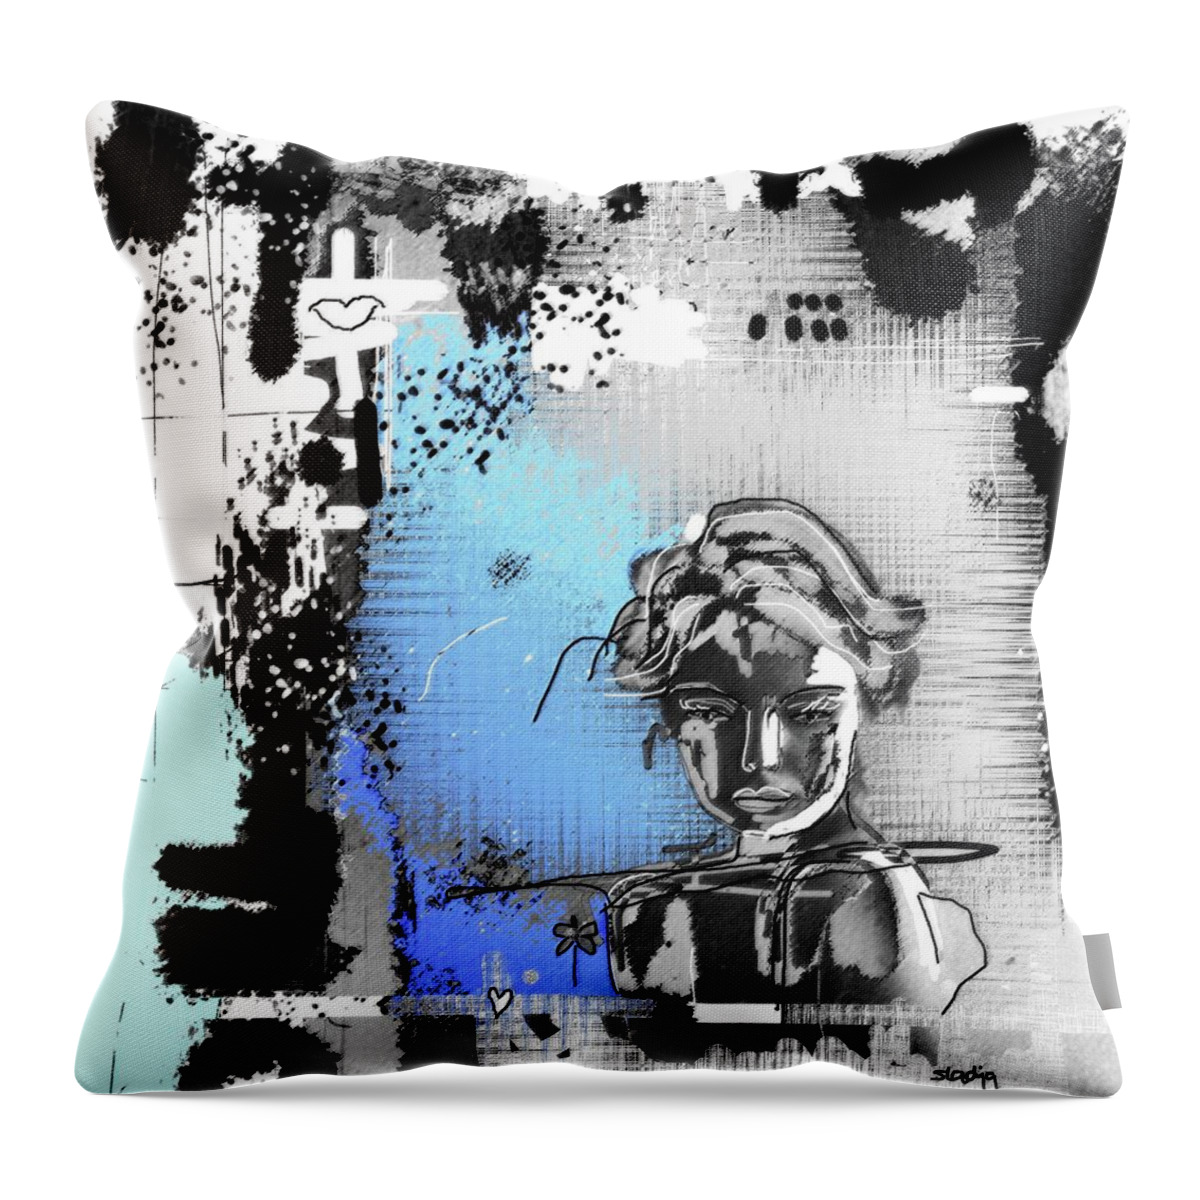 Lost Love Throw Pillow featuring the digital art Lost Love by Sladjana Lazarevic